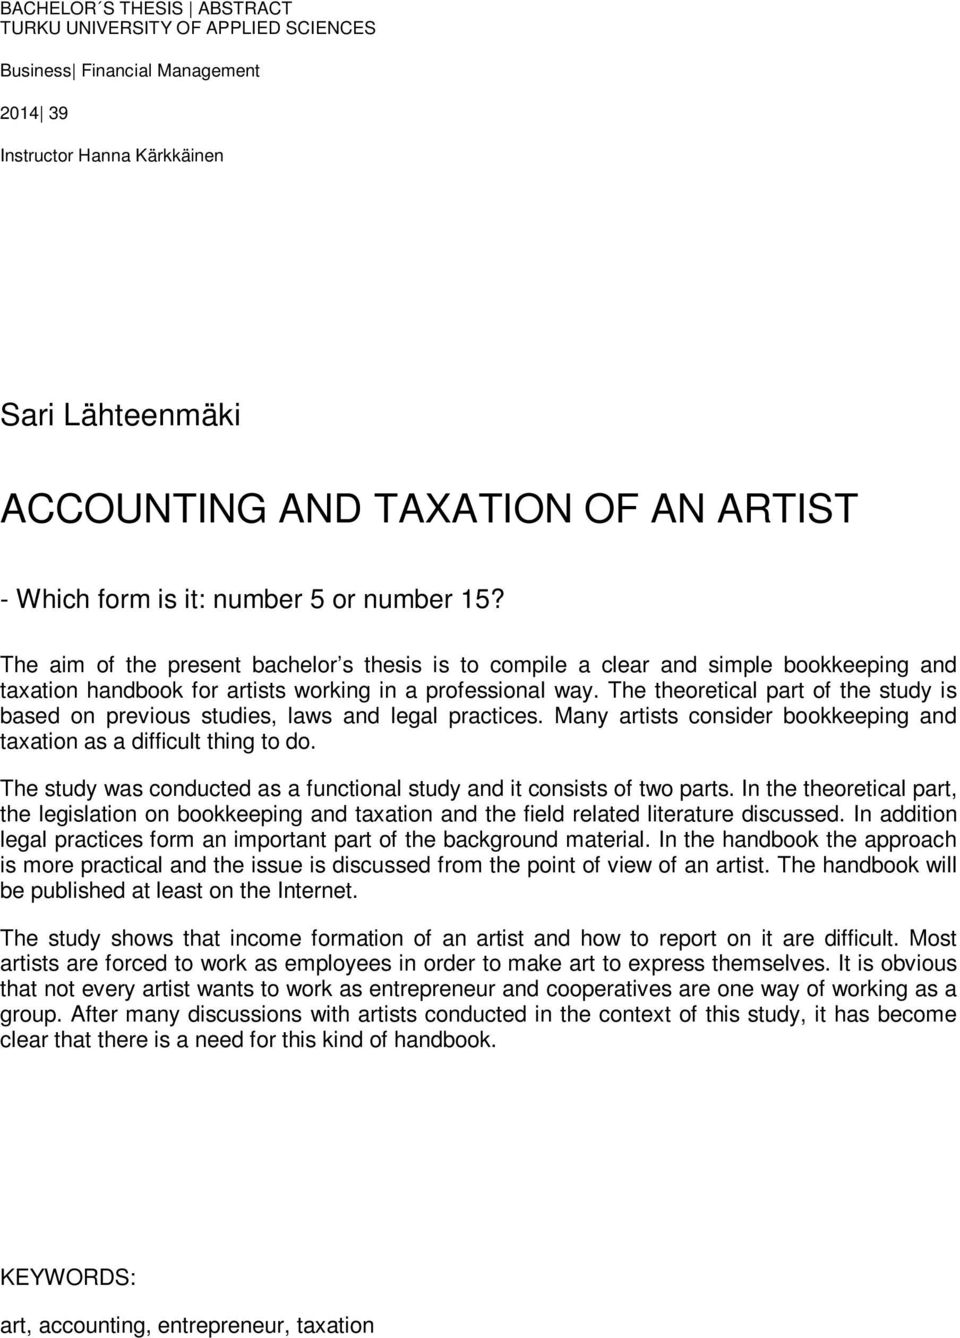 The theoretical part of the study is based on previous studies, laws and legal practices. Many artists consider bookkeeping and taxation as a difficult thing to do.